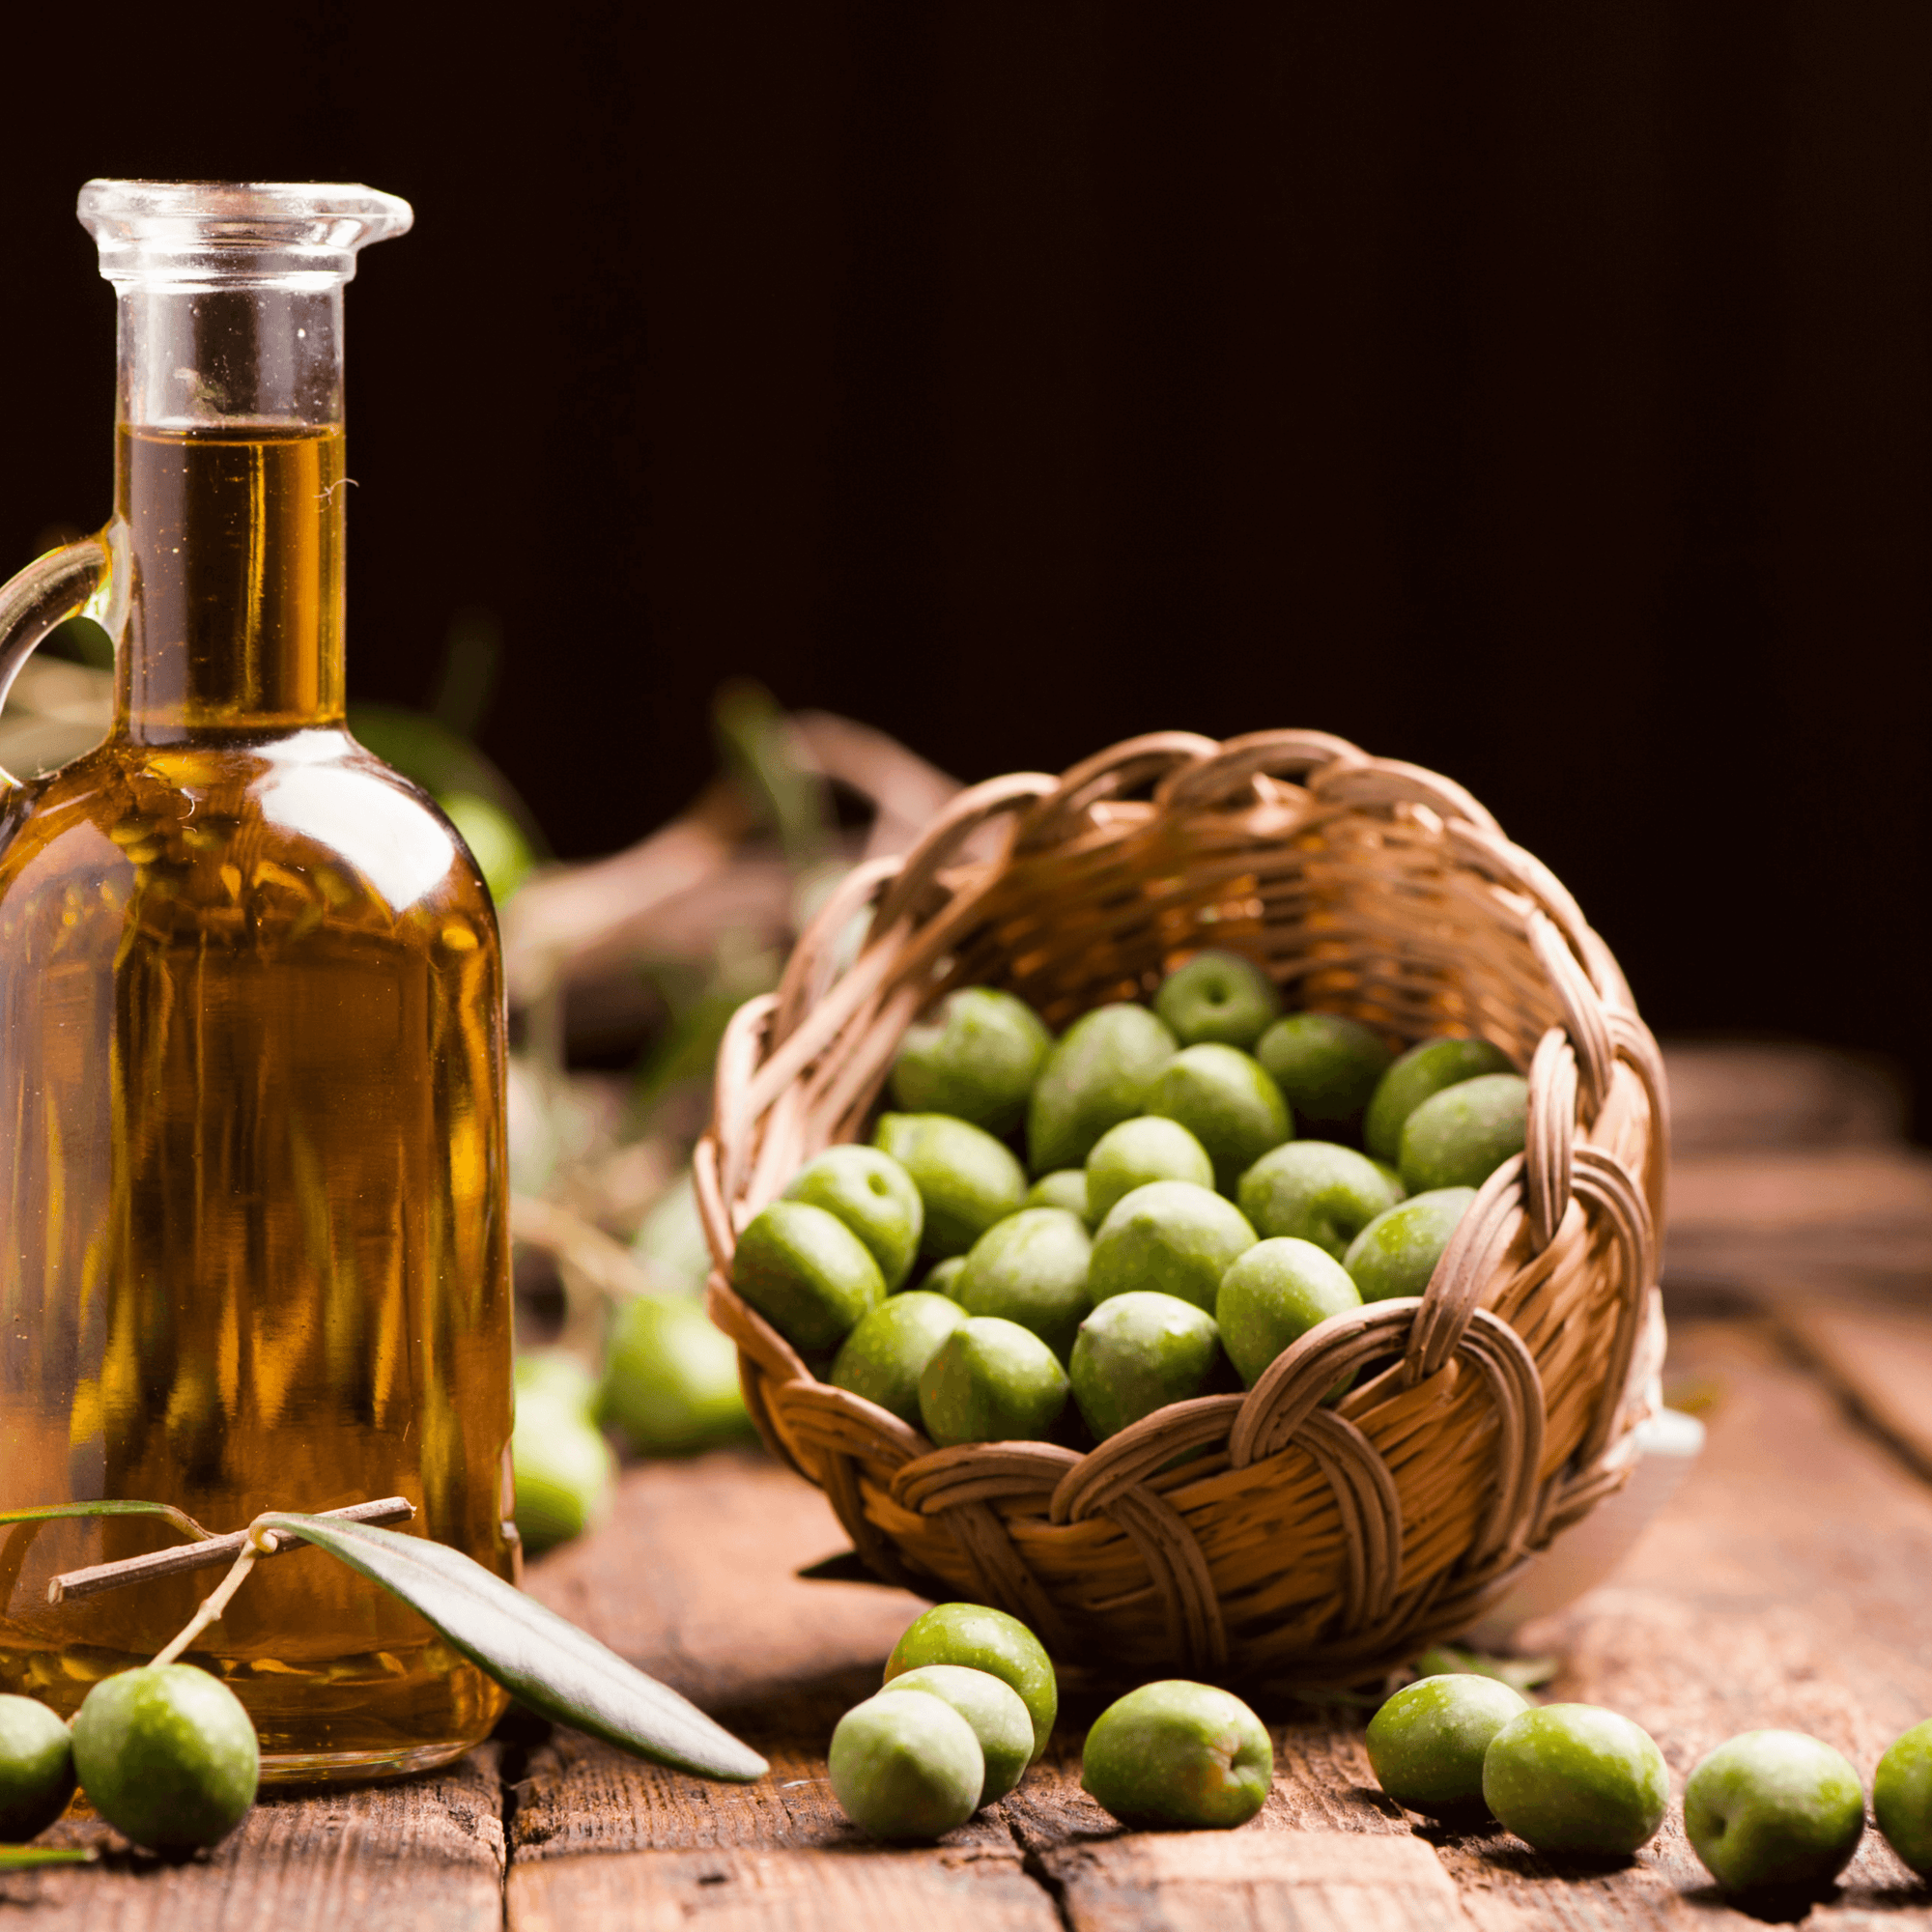 SQUALENE (FROM OLIVE OIL)